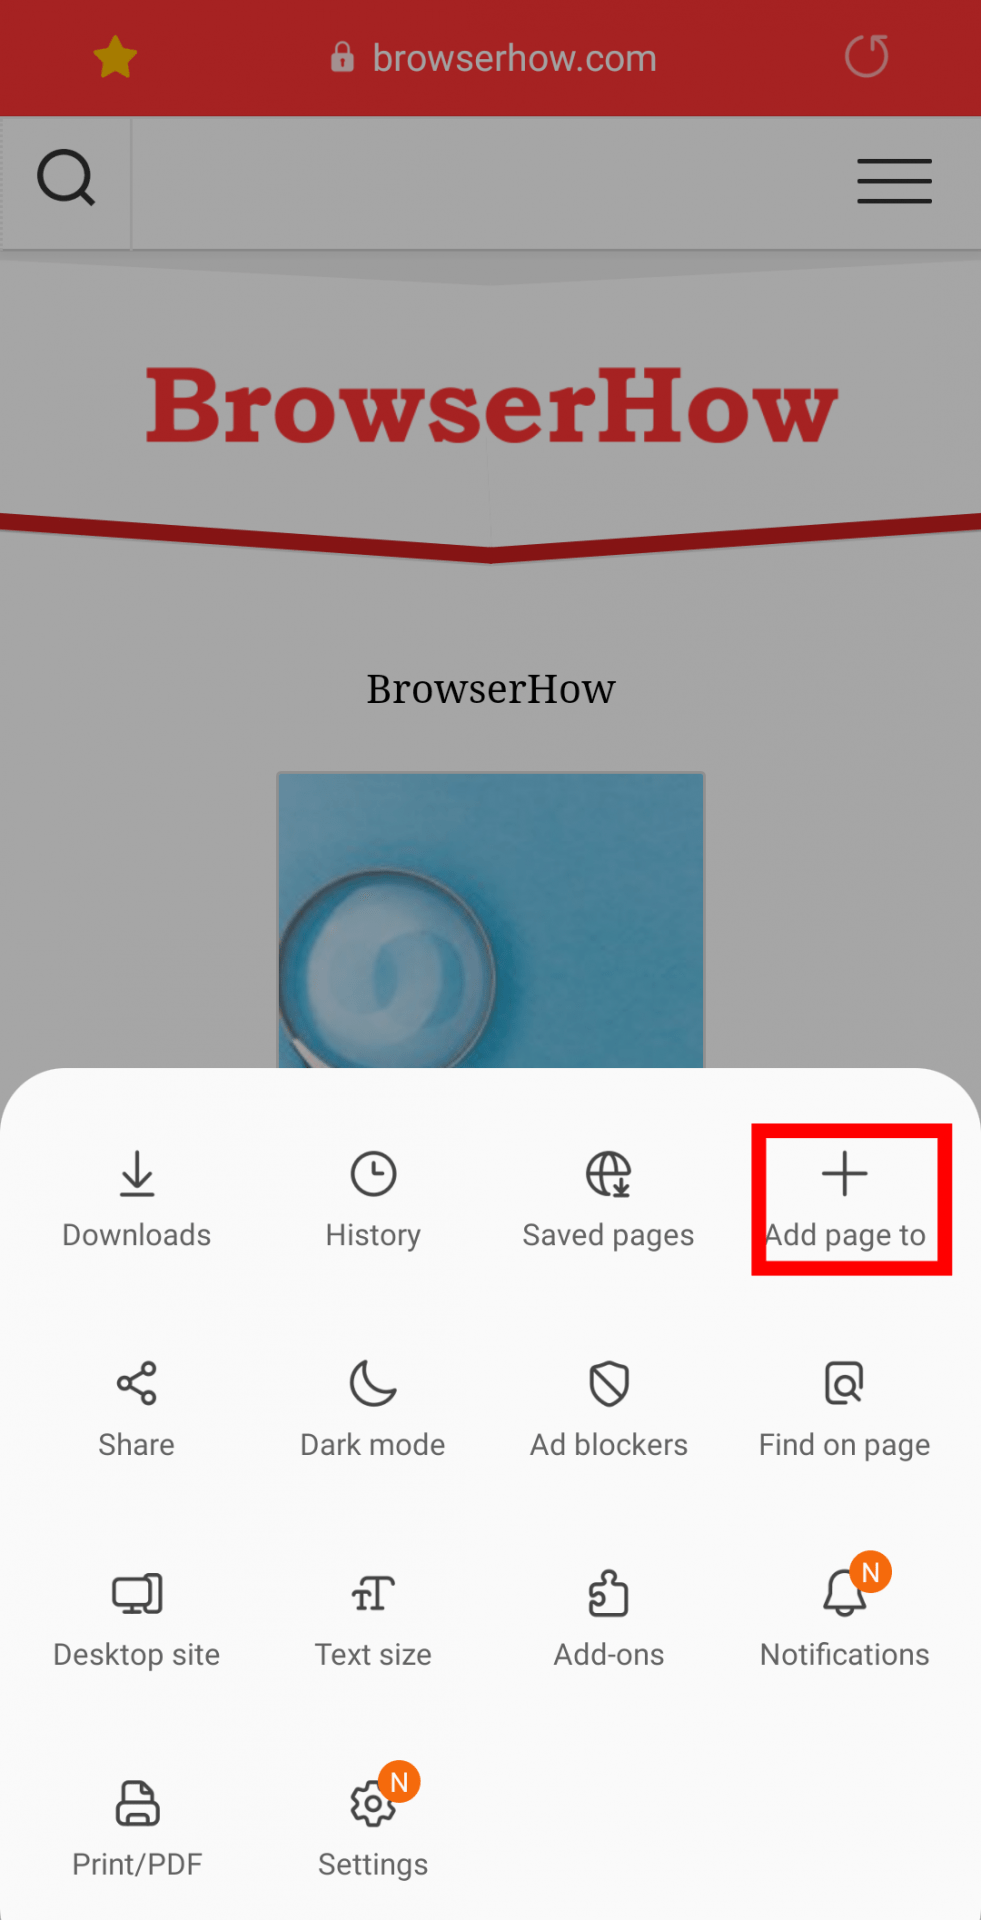 How to Download Pages for Offline Access in Samsung Internet?